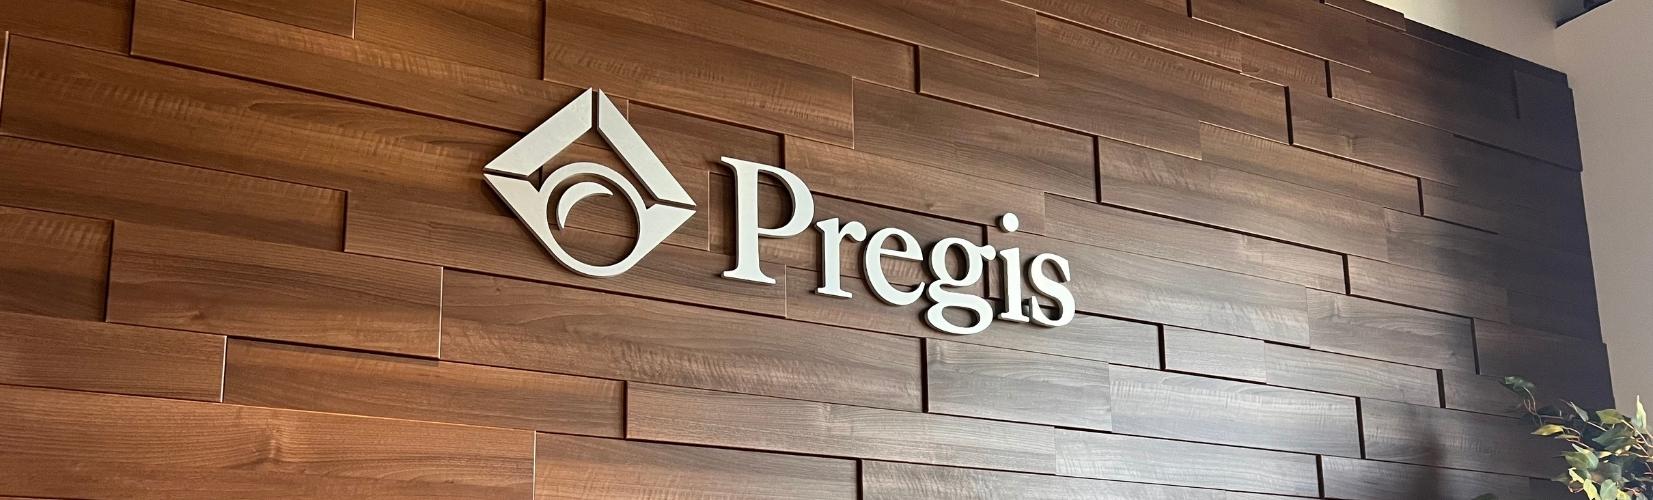 Pregis logo on wooden feature wall